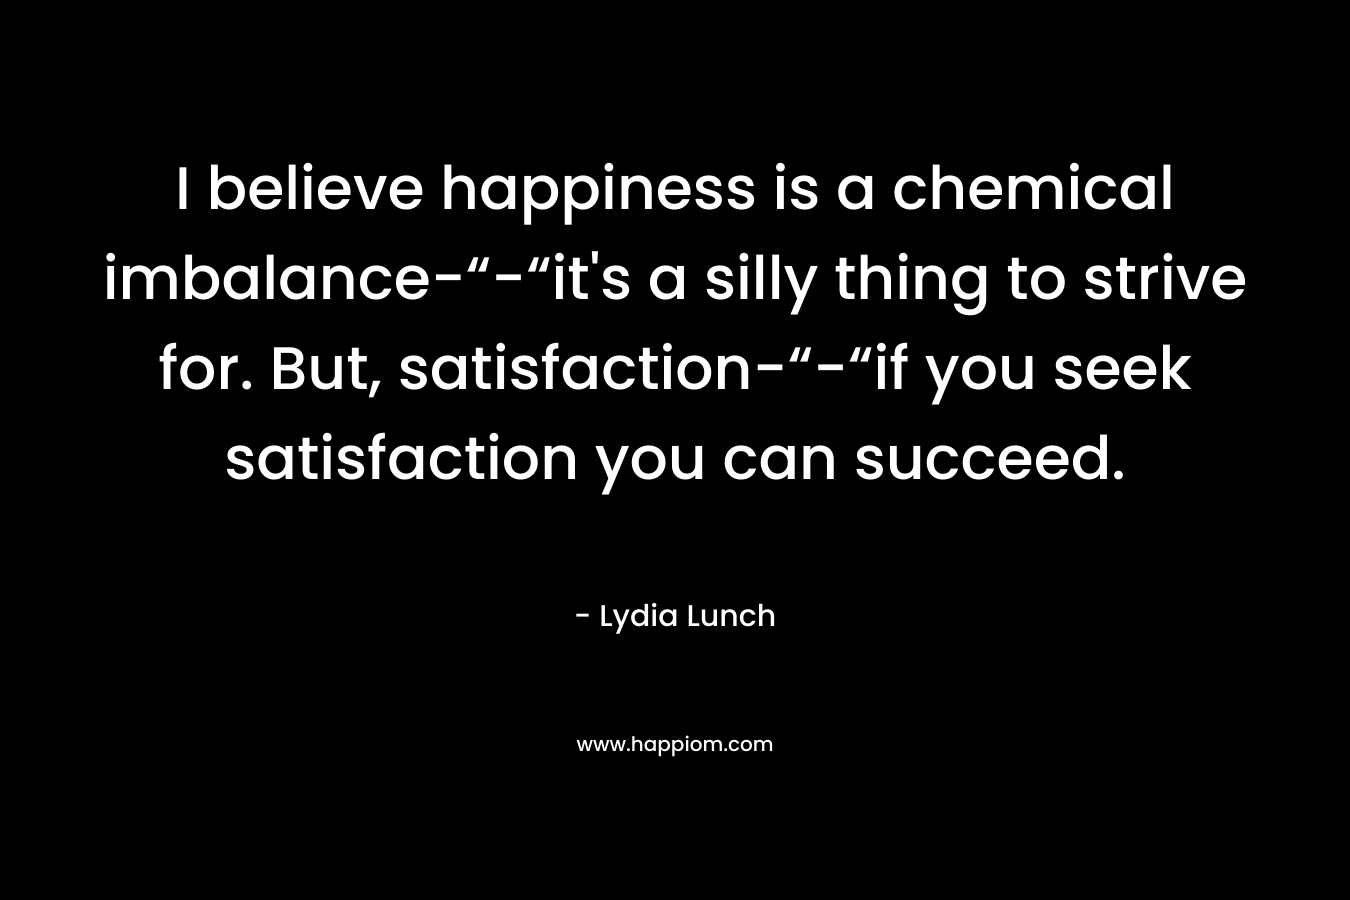 I believe happiness is a chemical imbalance-“-“it's a silly thing to strive for. But, satisfaction-“-“if you seek satisfaction you can succeed.